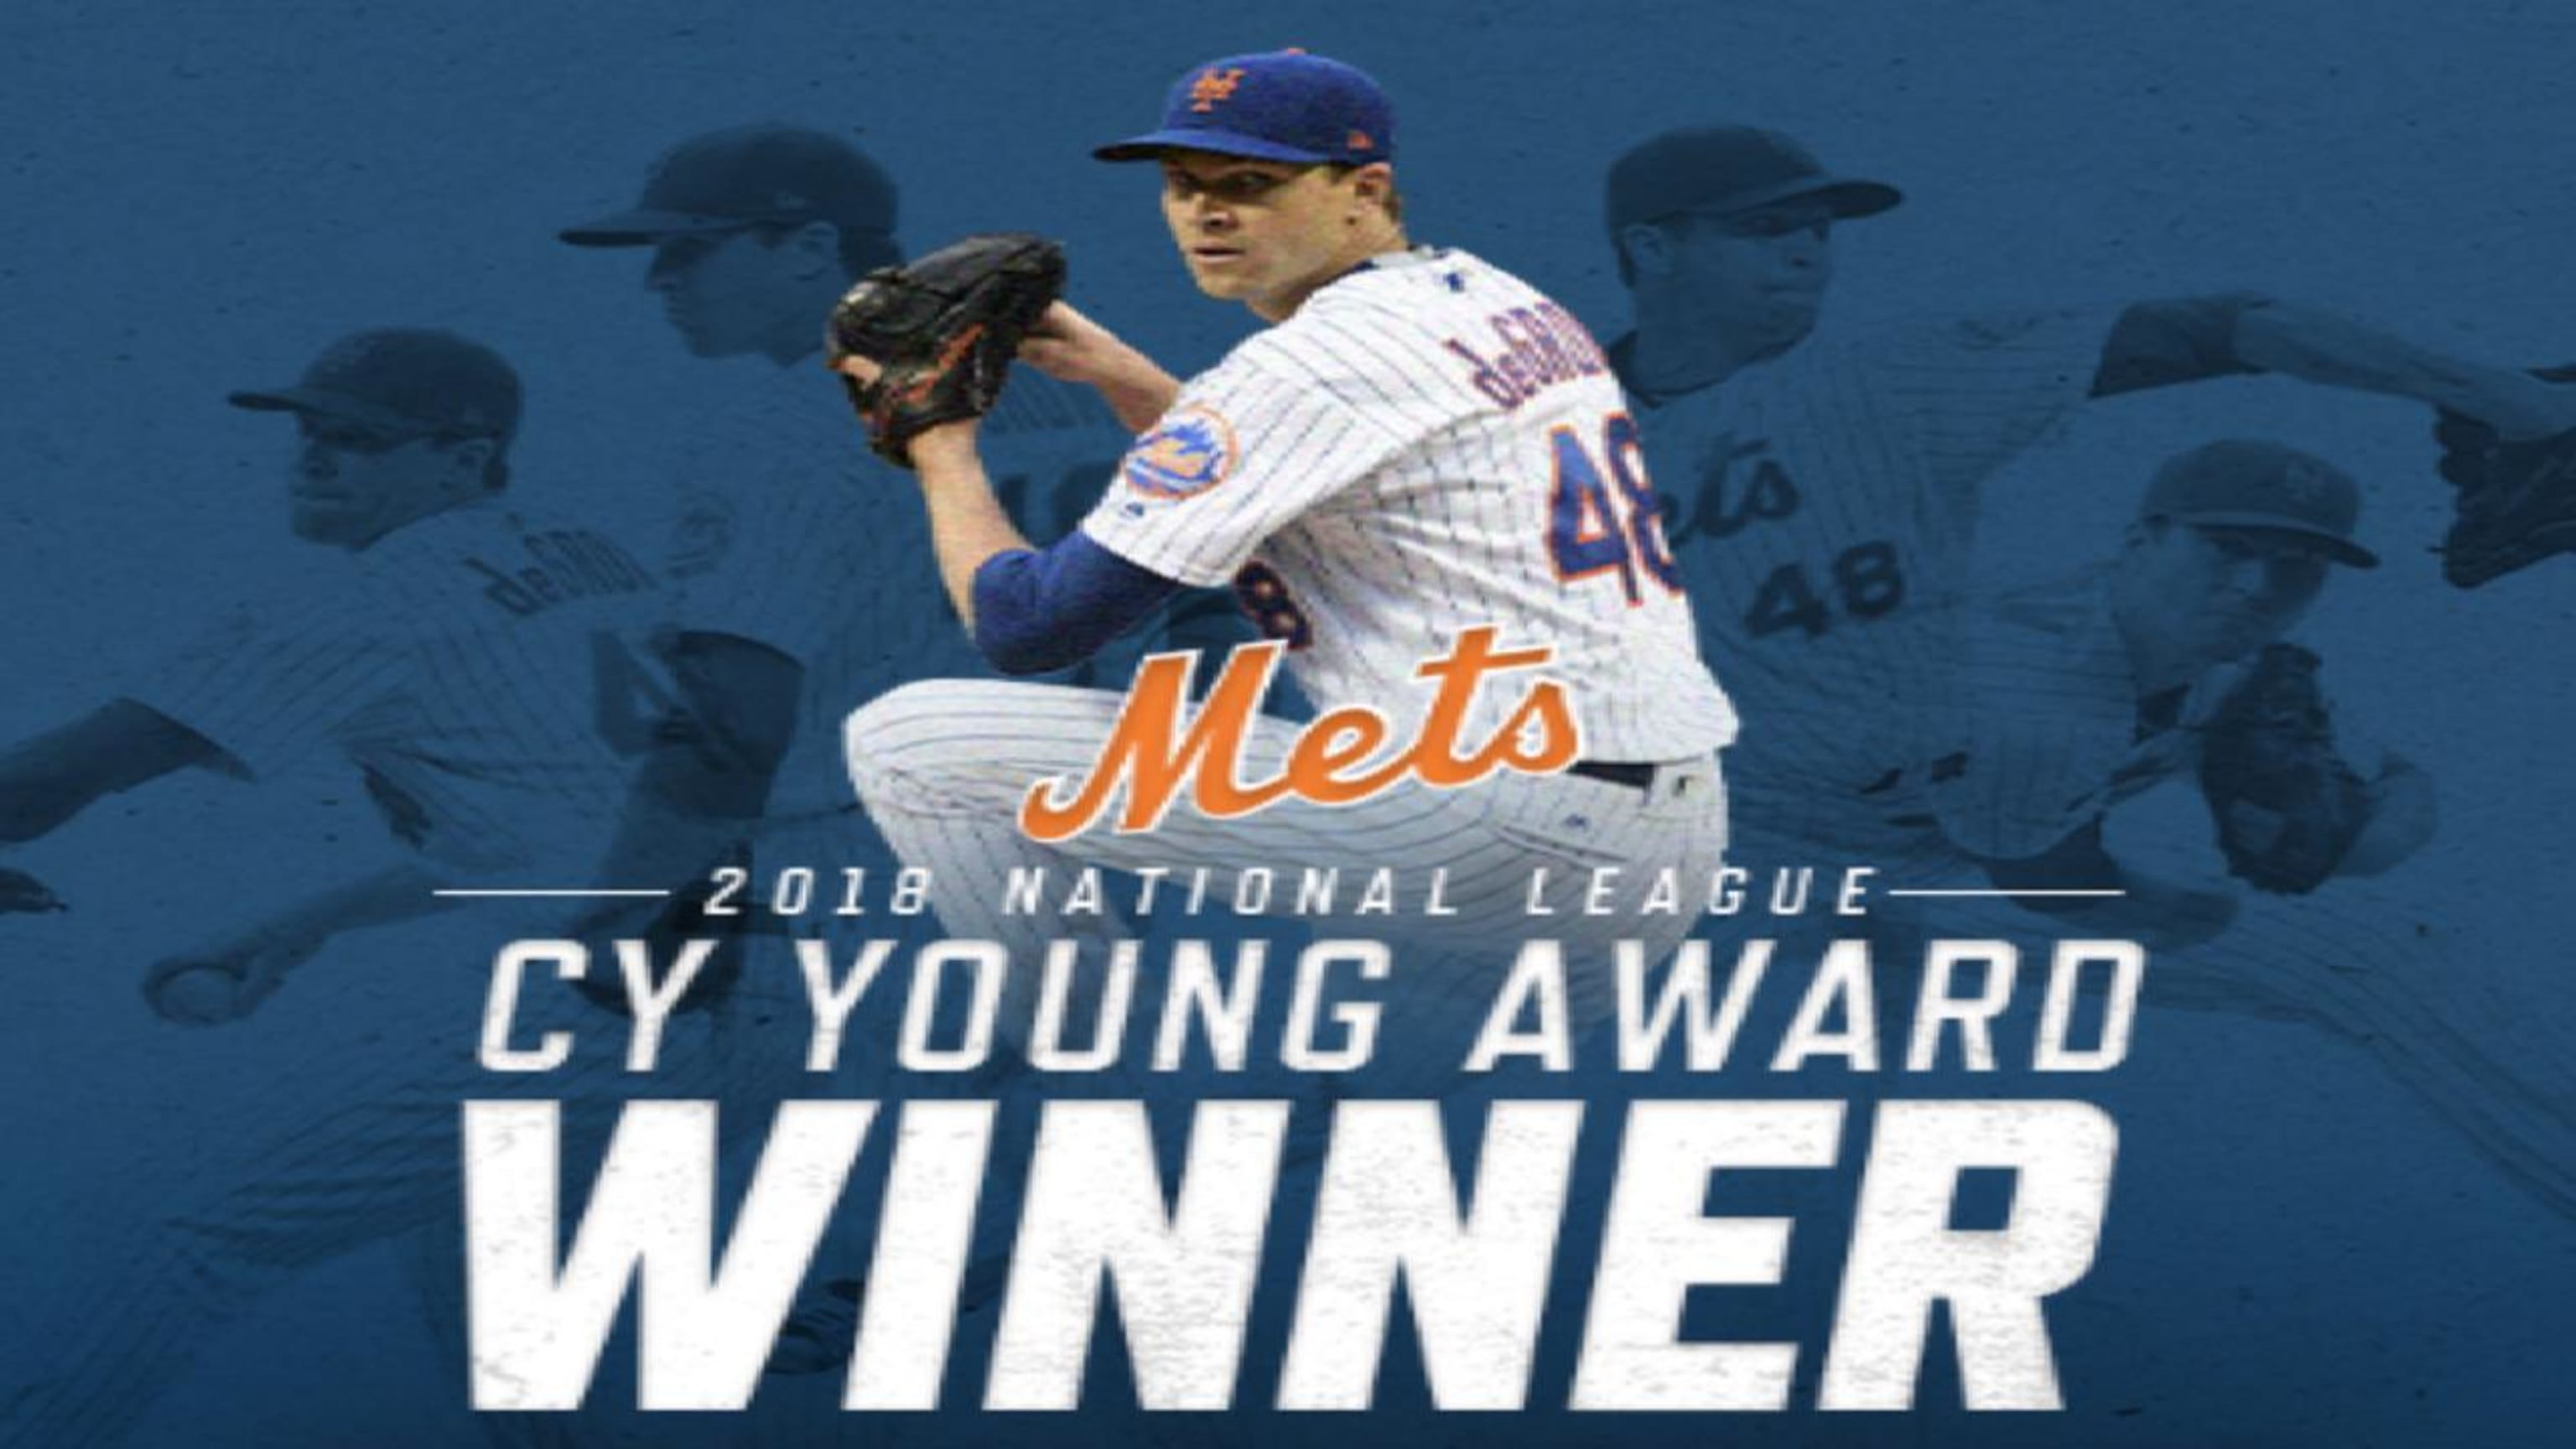 Mets' 2019 starting pitching preview